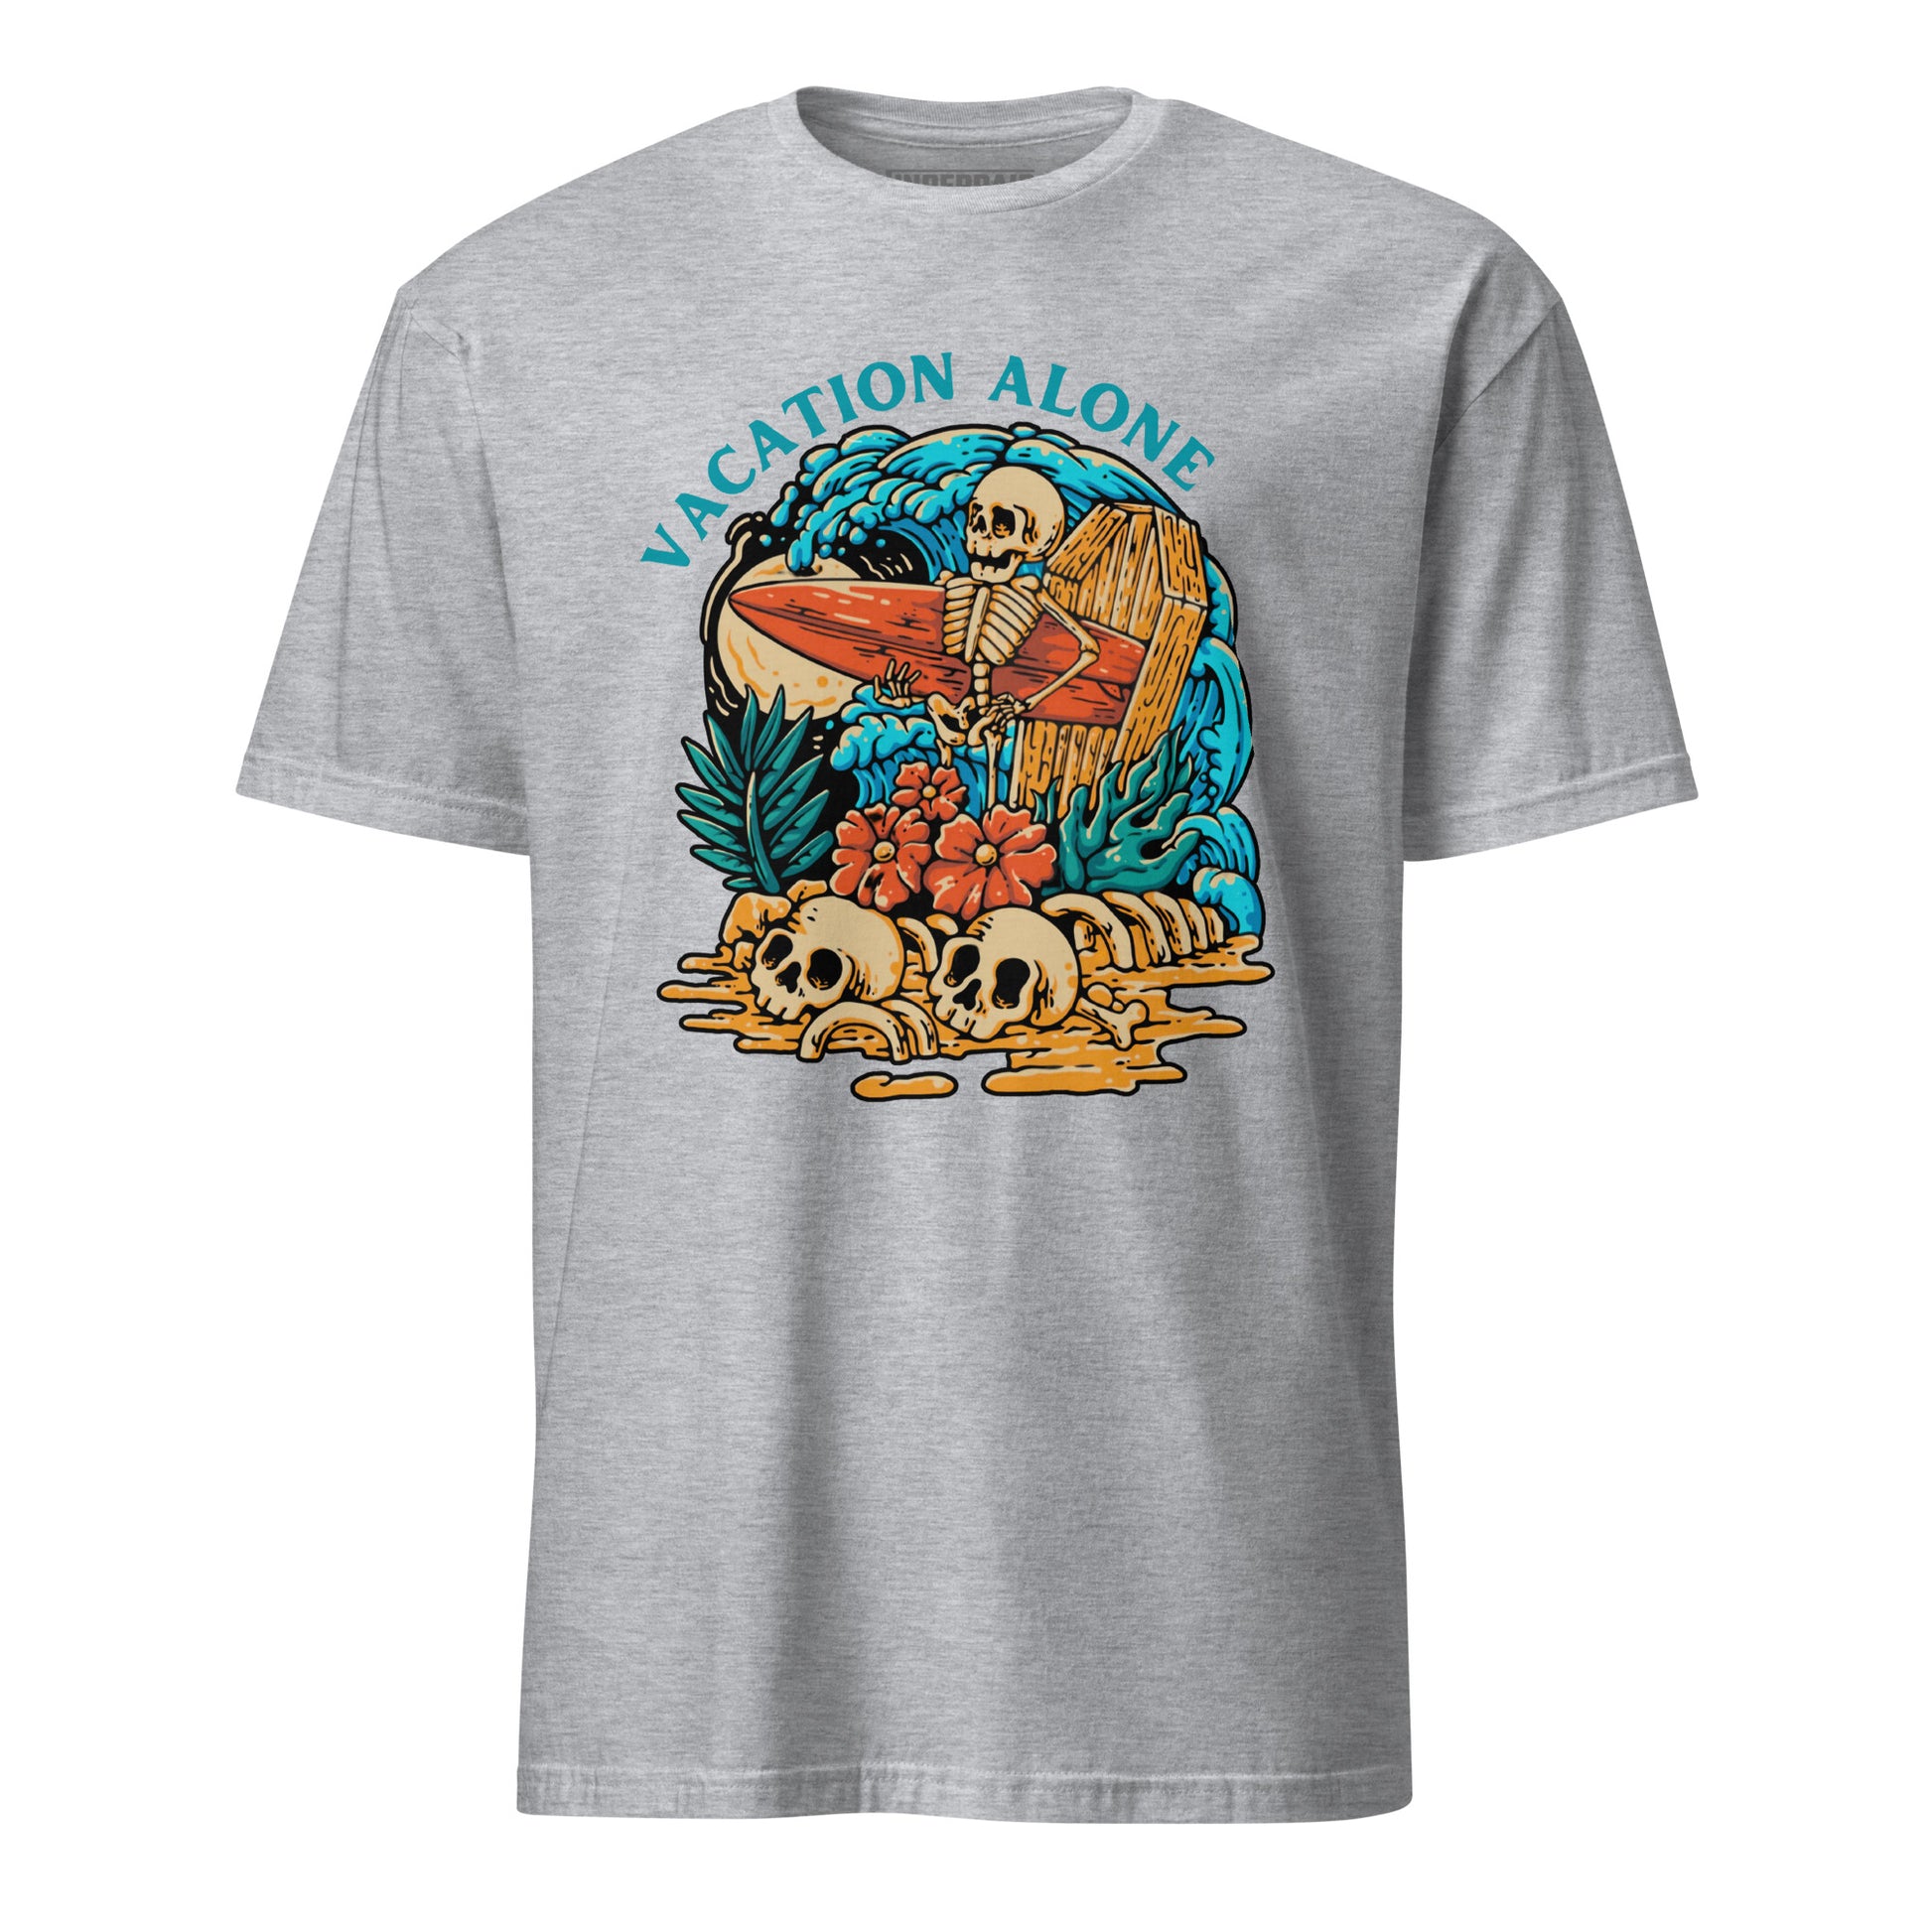 Vacation Alone graphic tee featuring full color design.